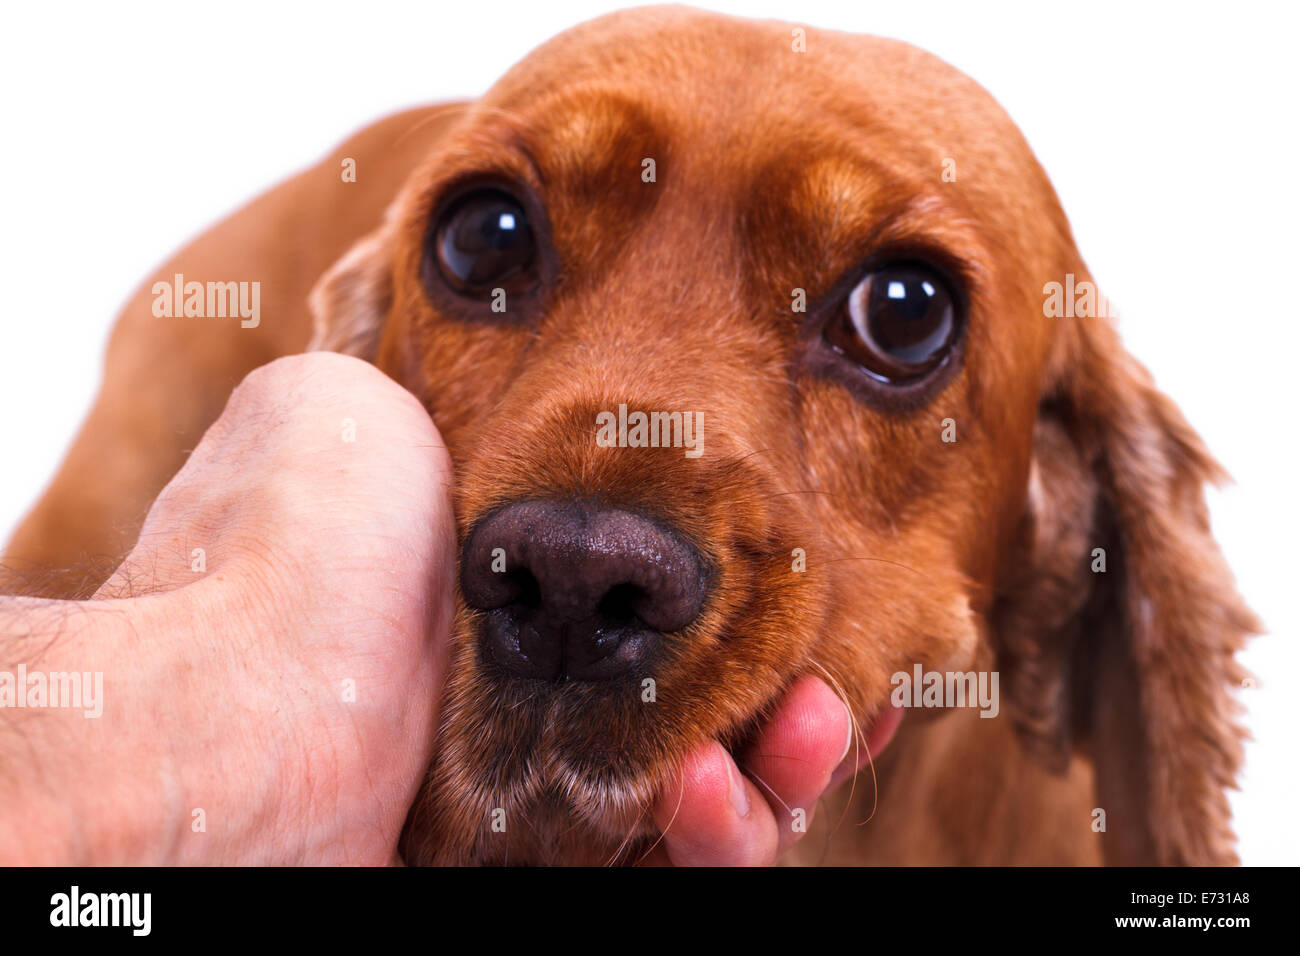 hand-caressing-english-cocker-spaniel-dog-head-isolated-on-white-background-E731A8.jpg